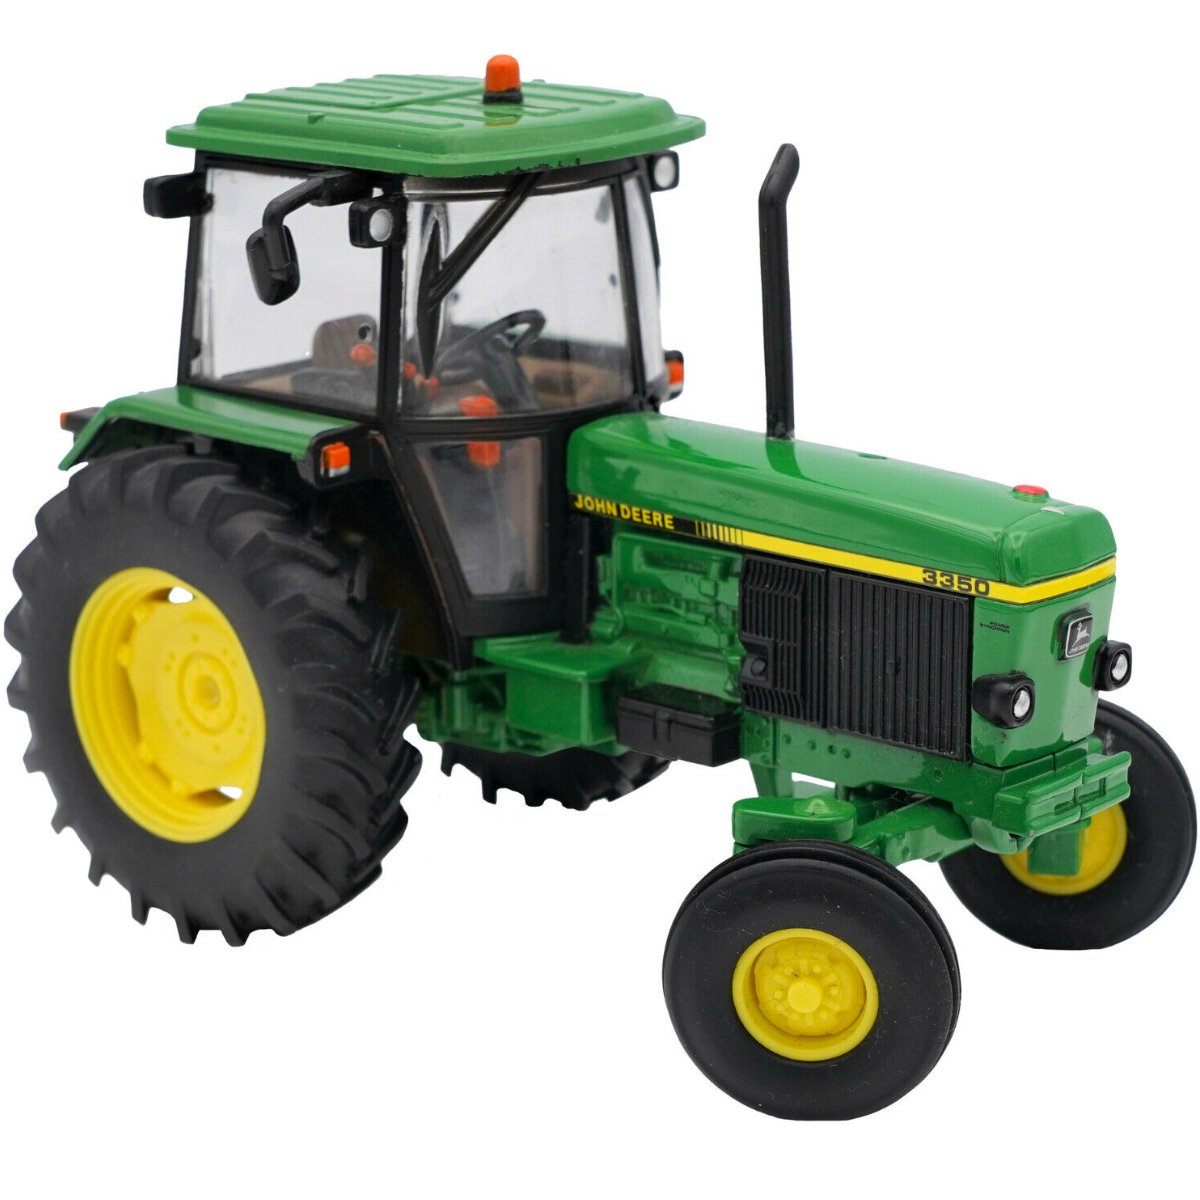 Britains John Deere 3350 2WD Limited Edition Tractor - 1:32 Scale - Phillips Hobbies